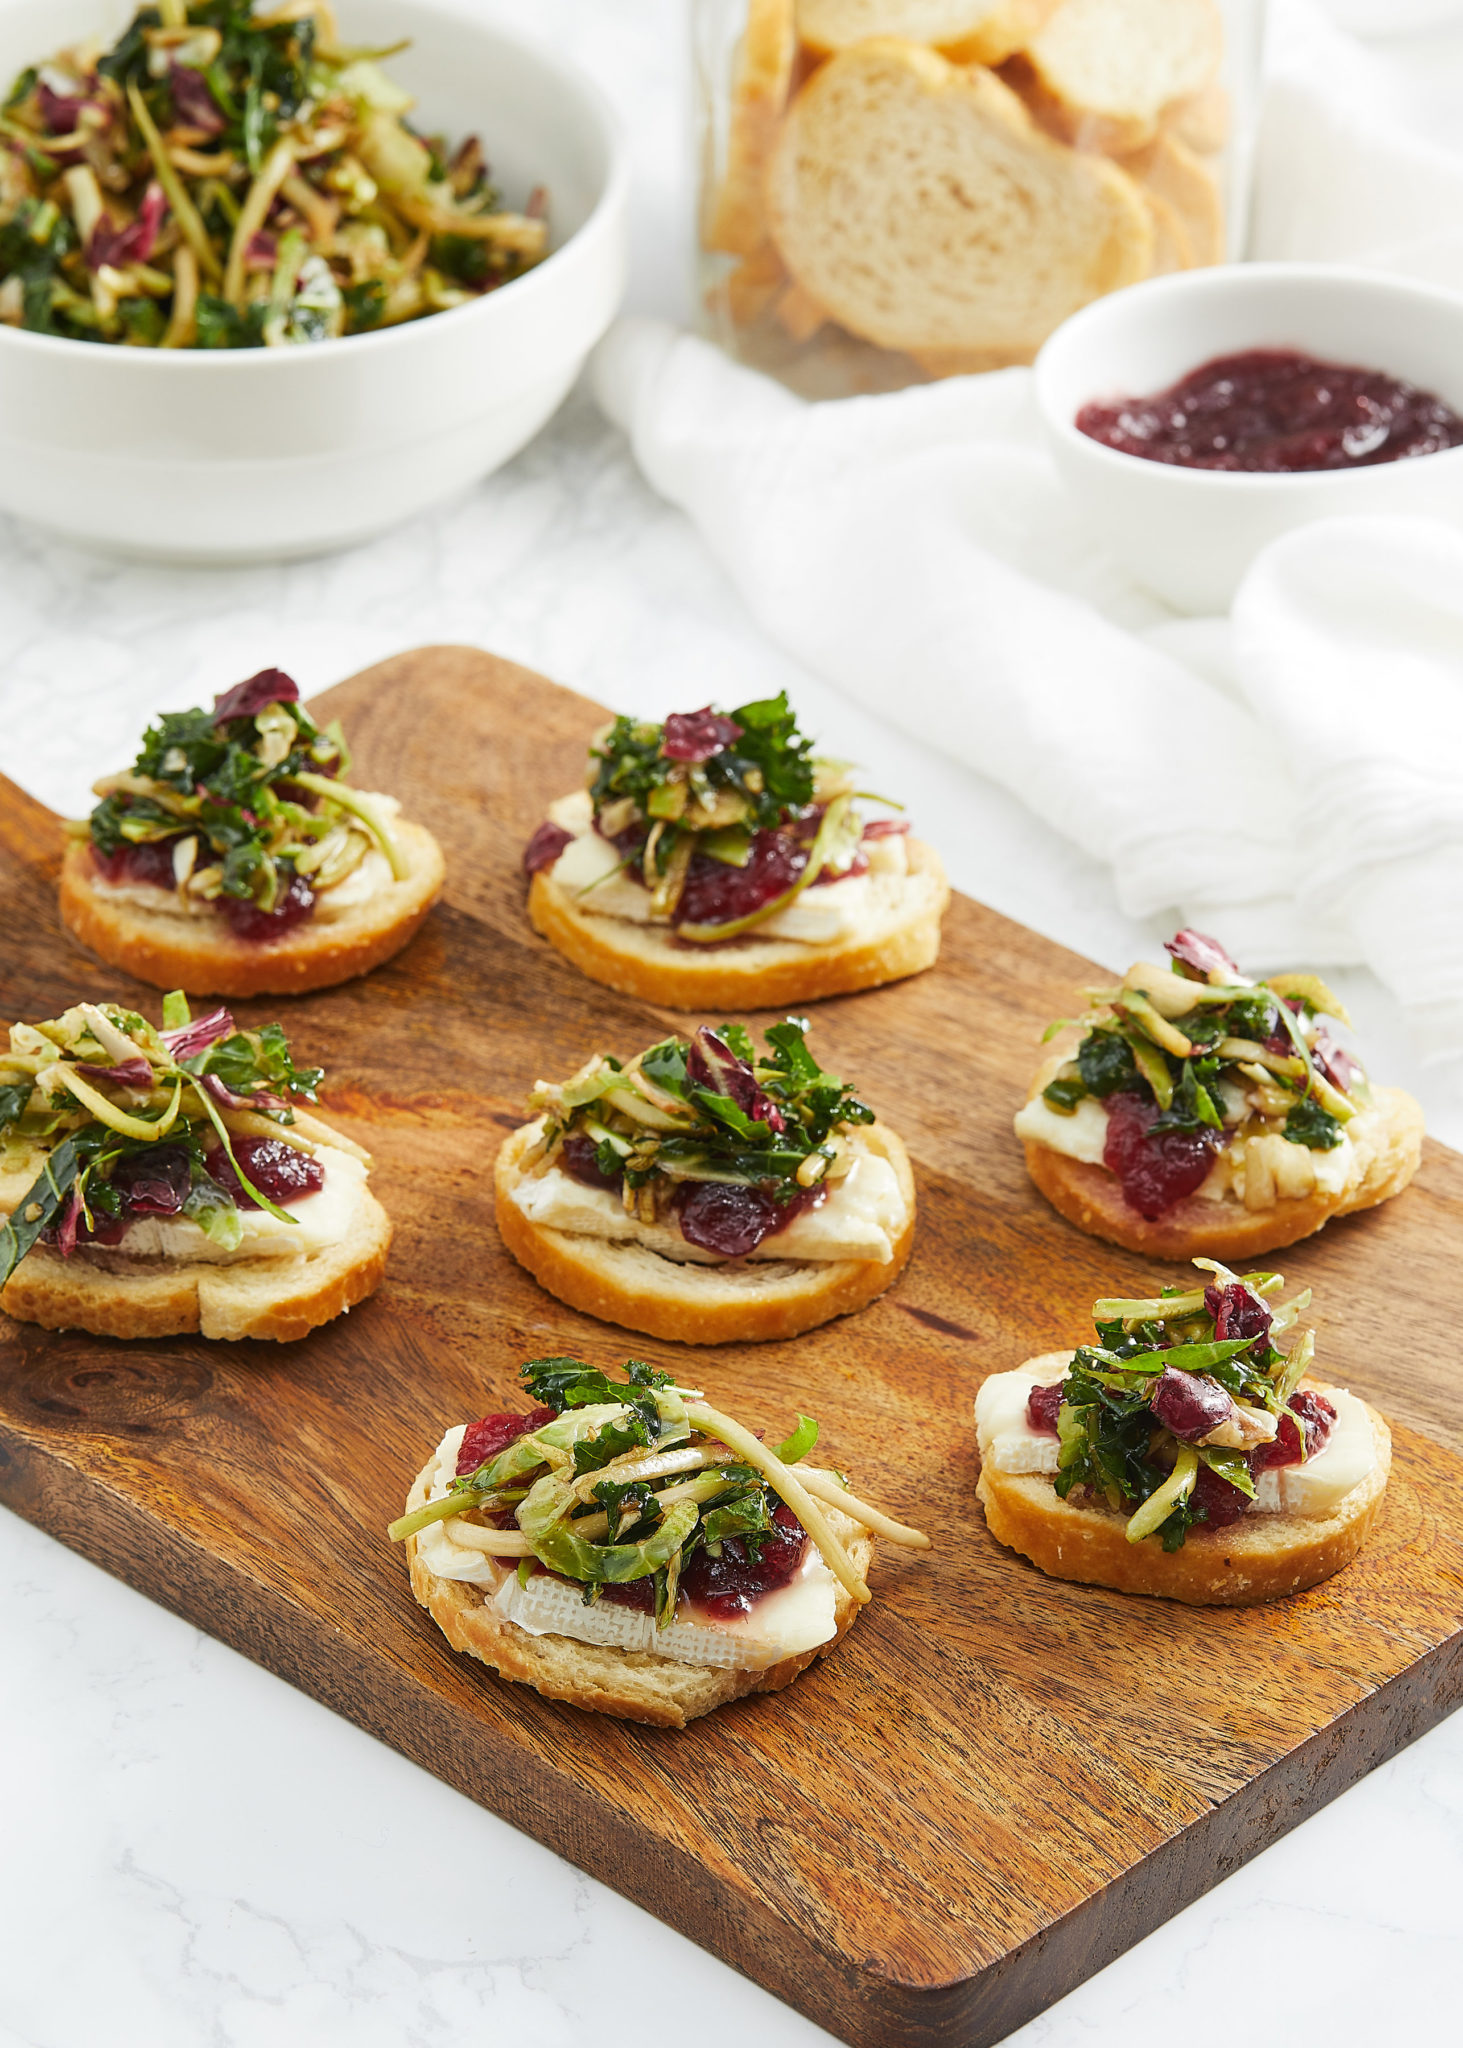 Brie, Cranberry & Kale Cabbage Blend Bites - Foodservice by Mann Packing